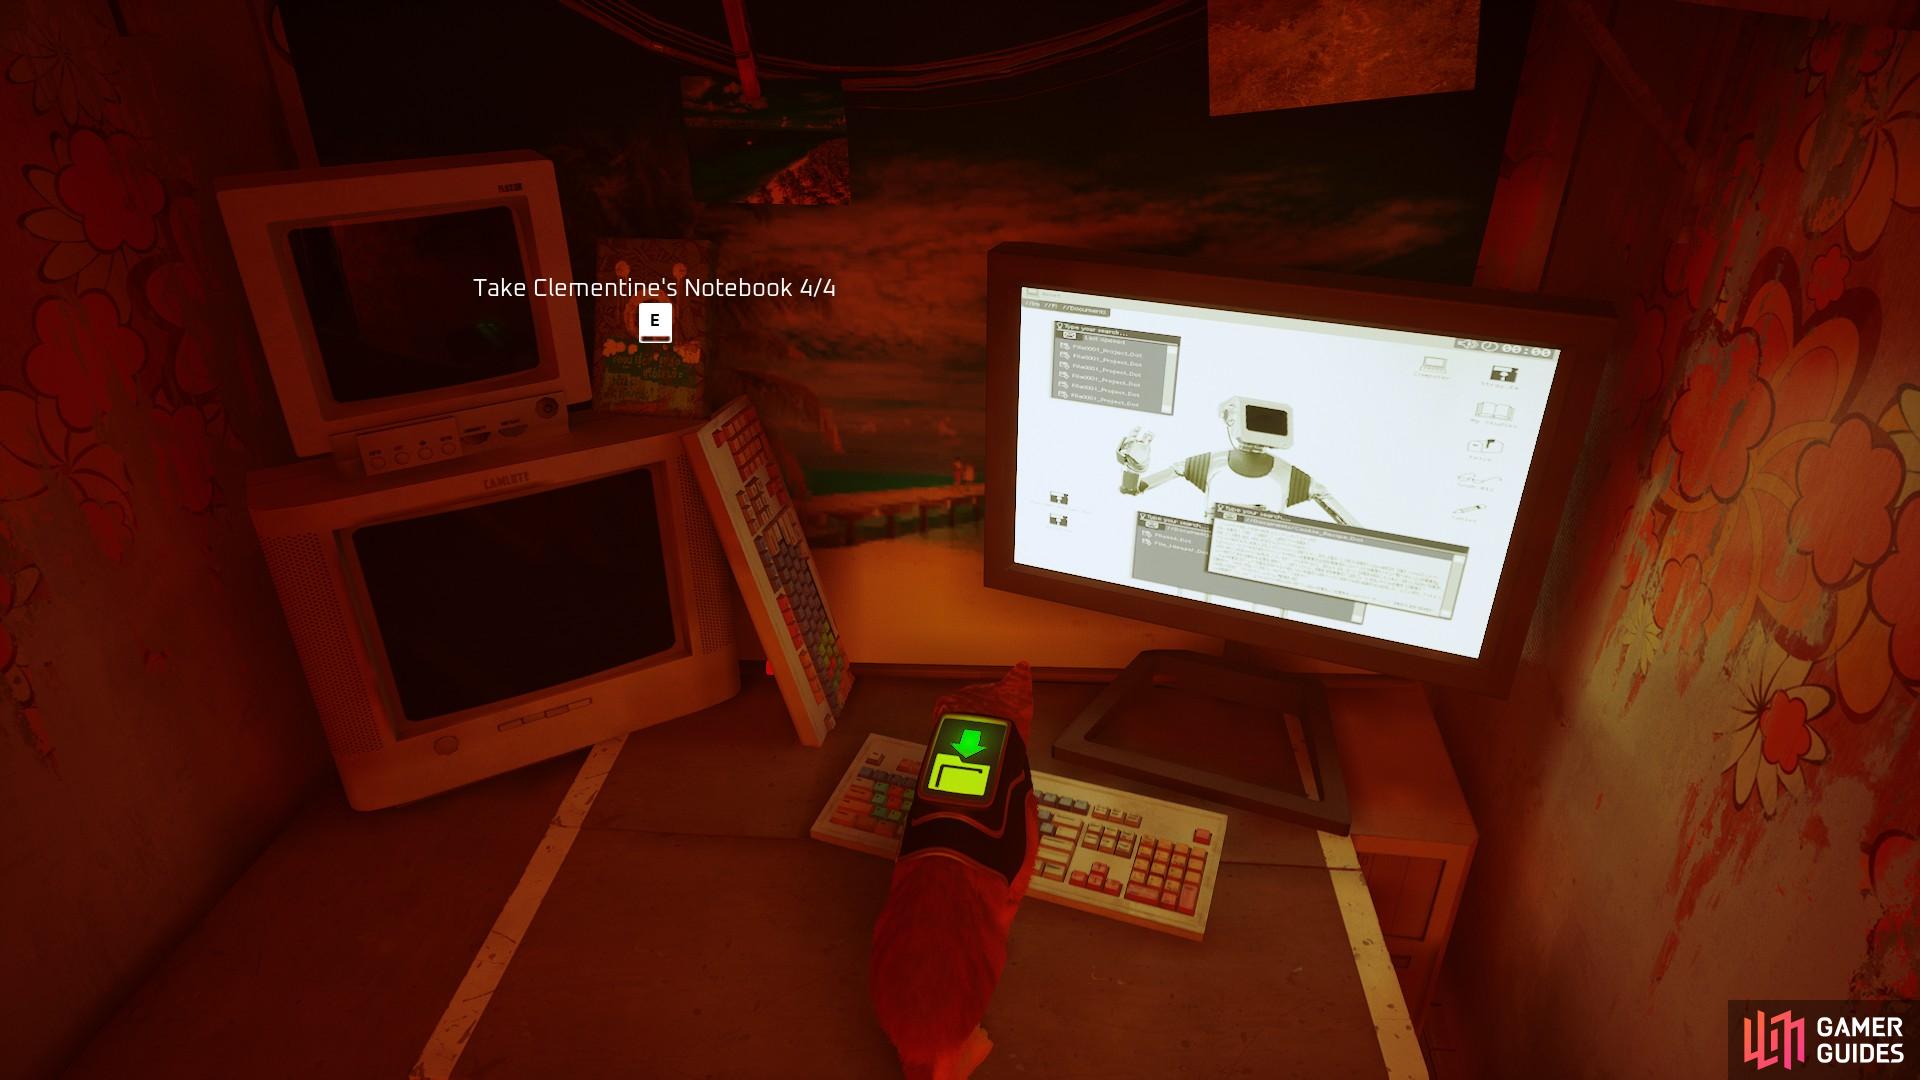 Clementine's notebook is by her PC in her apartment.